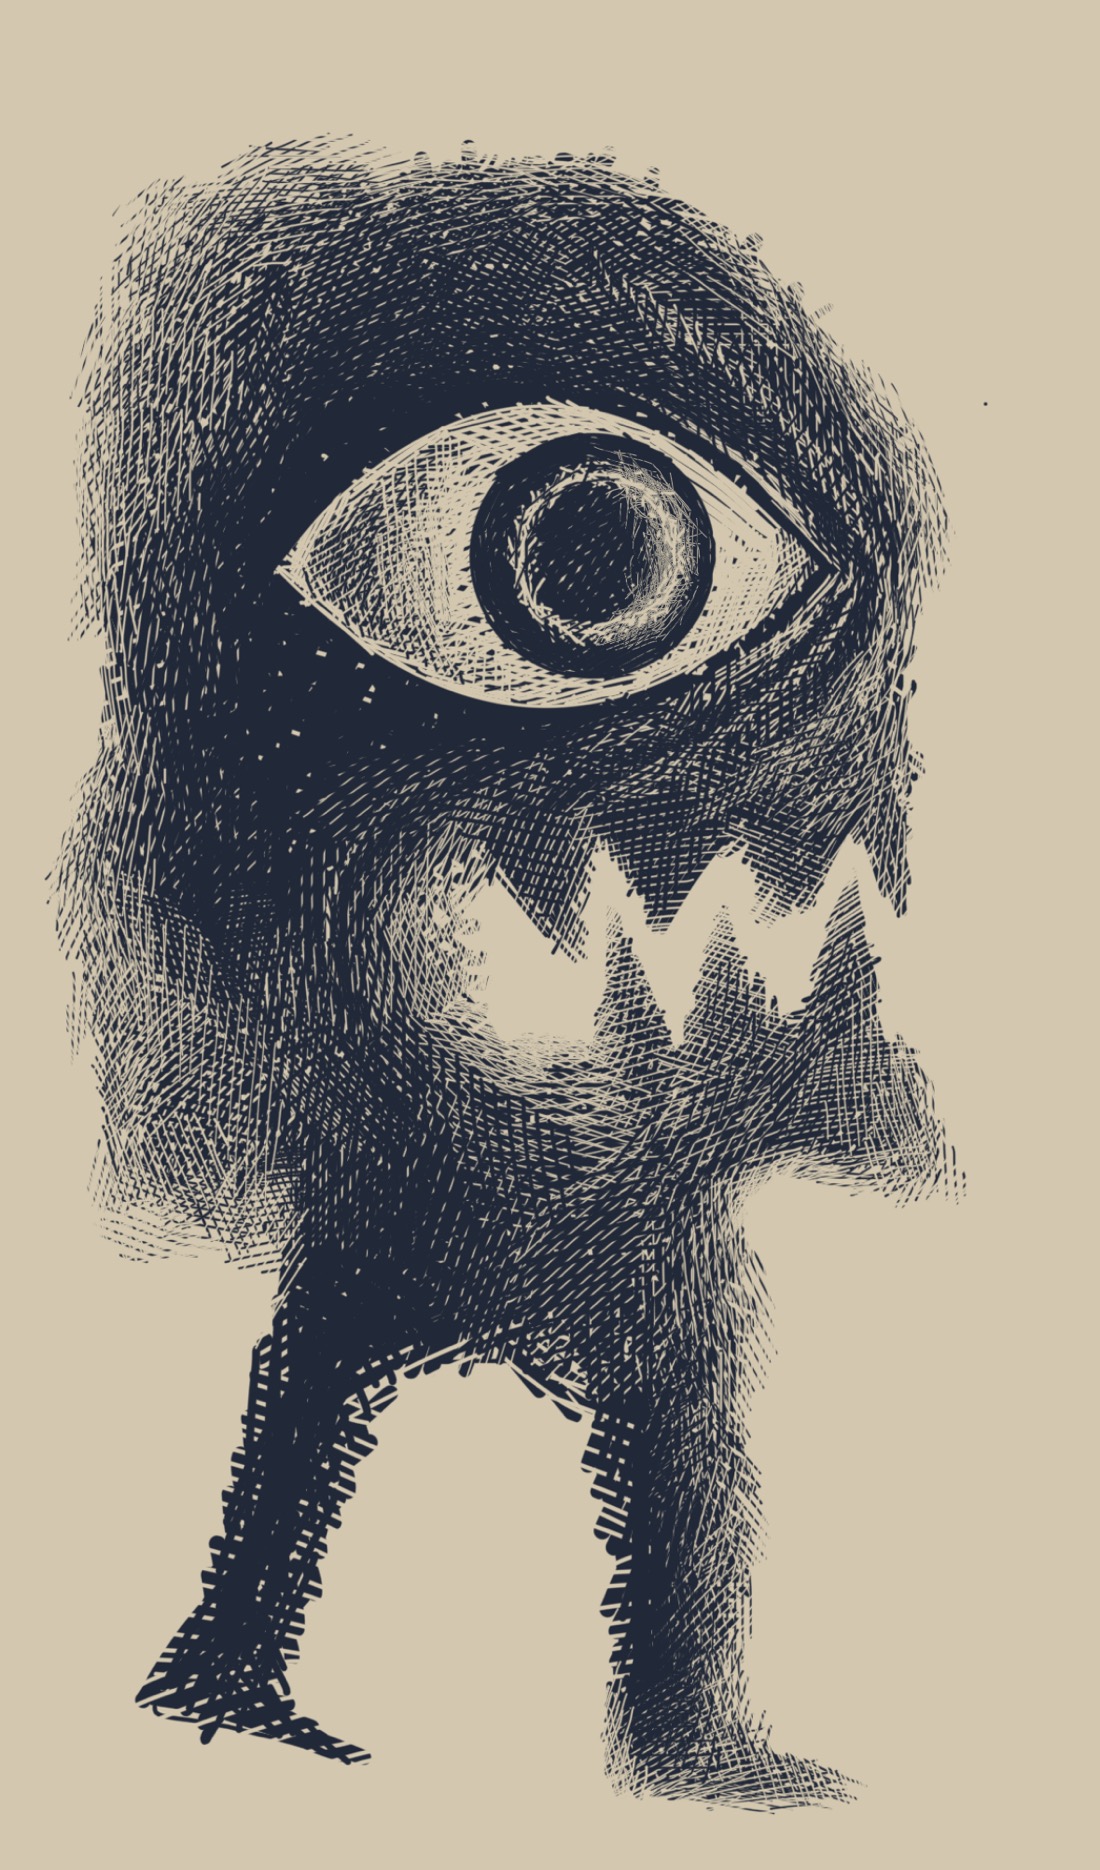 A two-legged creature with a giant eye, jagged teeth, and no visible arms. Two-thirds of the creature is taken up by its head. Parts of the creature are blurry, as if out of focus or obscured by fog.